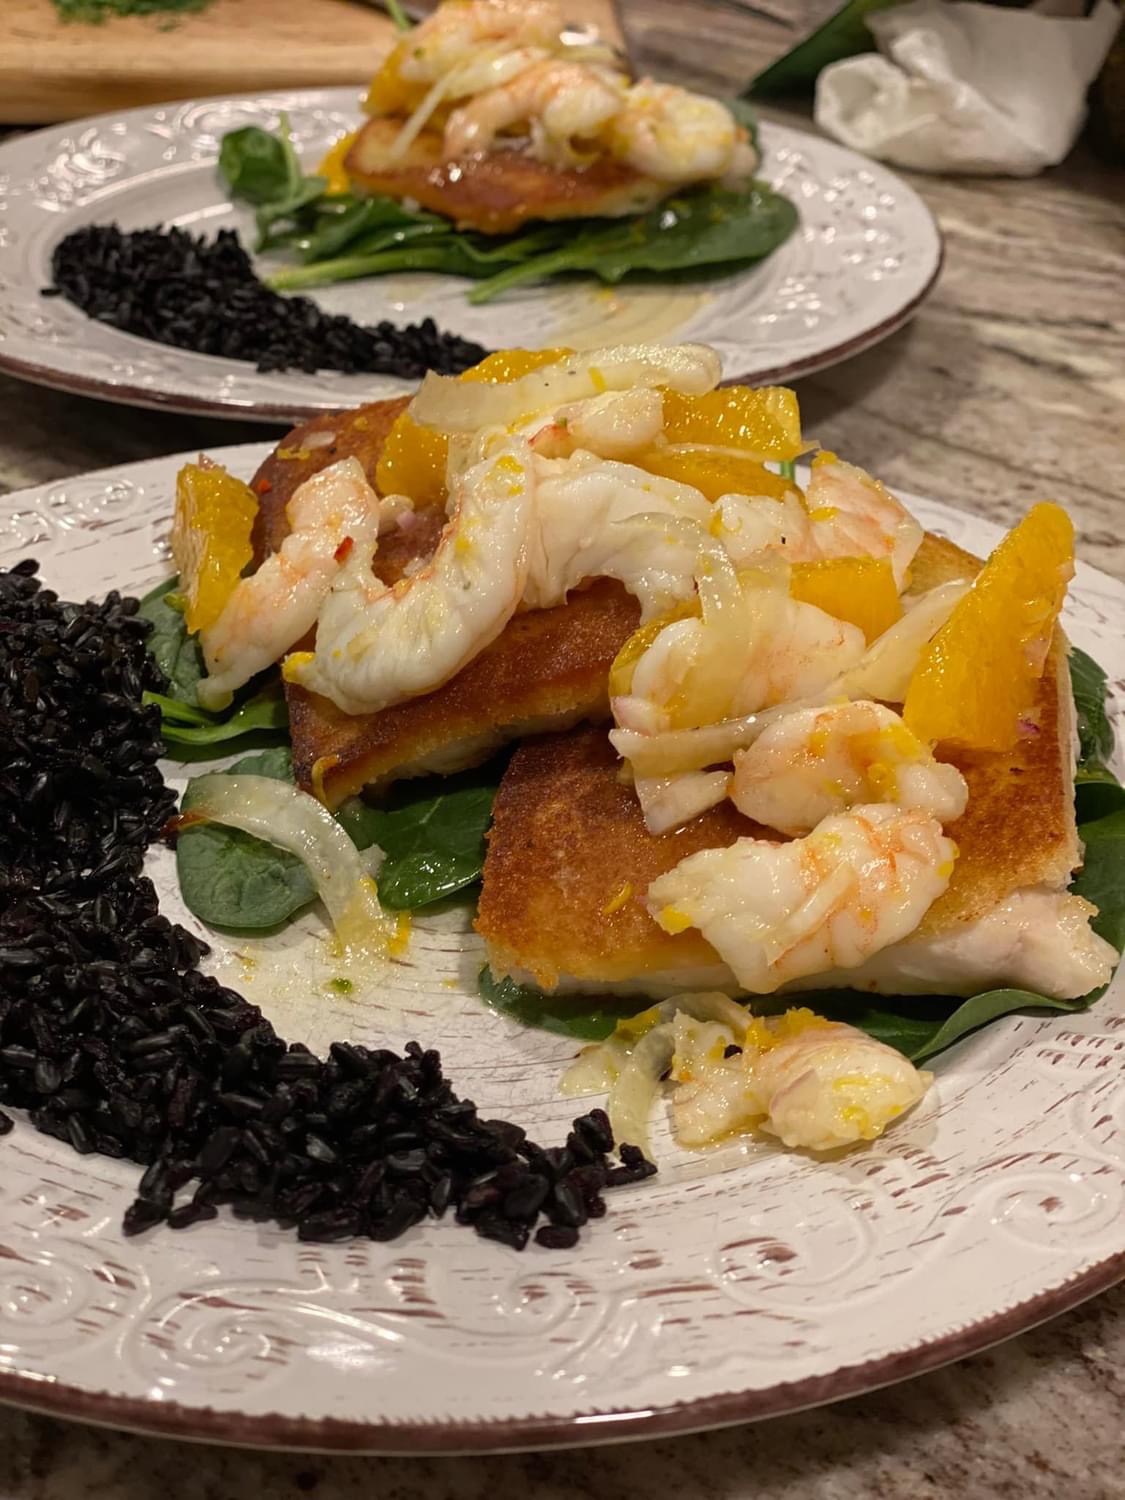 Breaded Red Snapper with Shrimp, Fennel and Oranges (serves 6) from John Besh’s My New Orleans